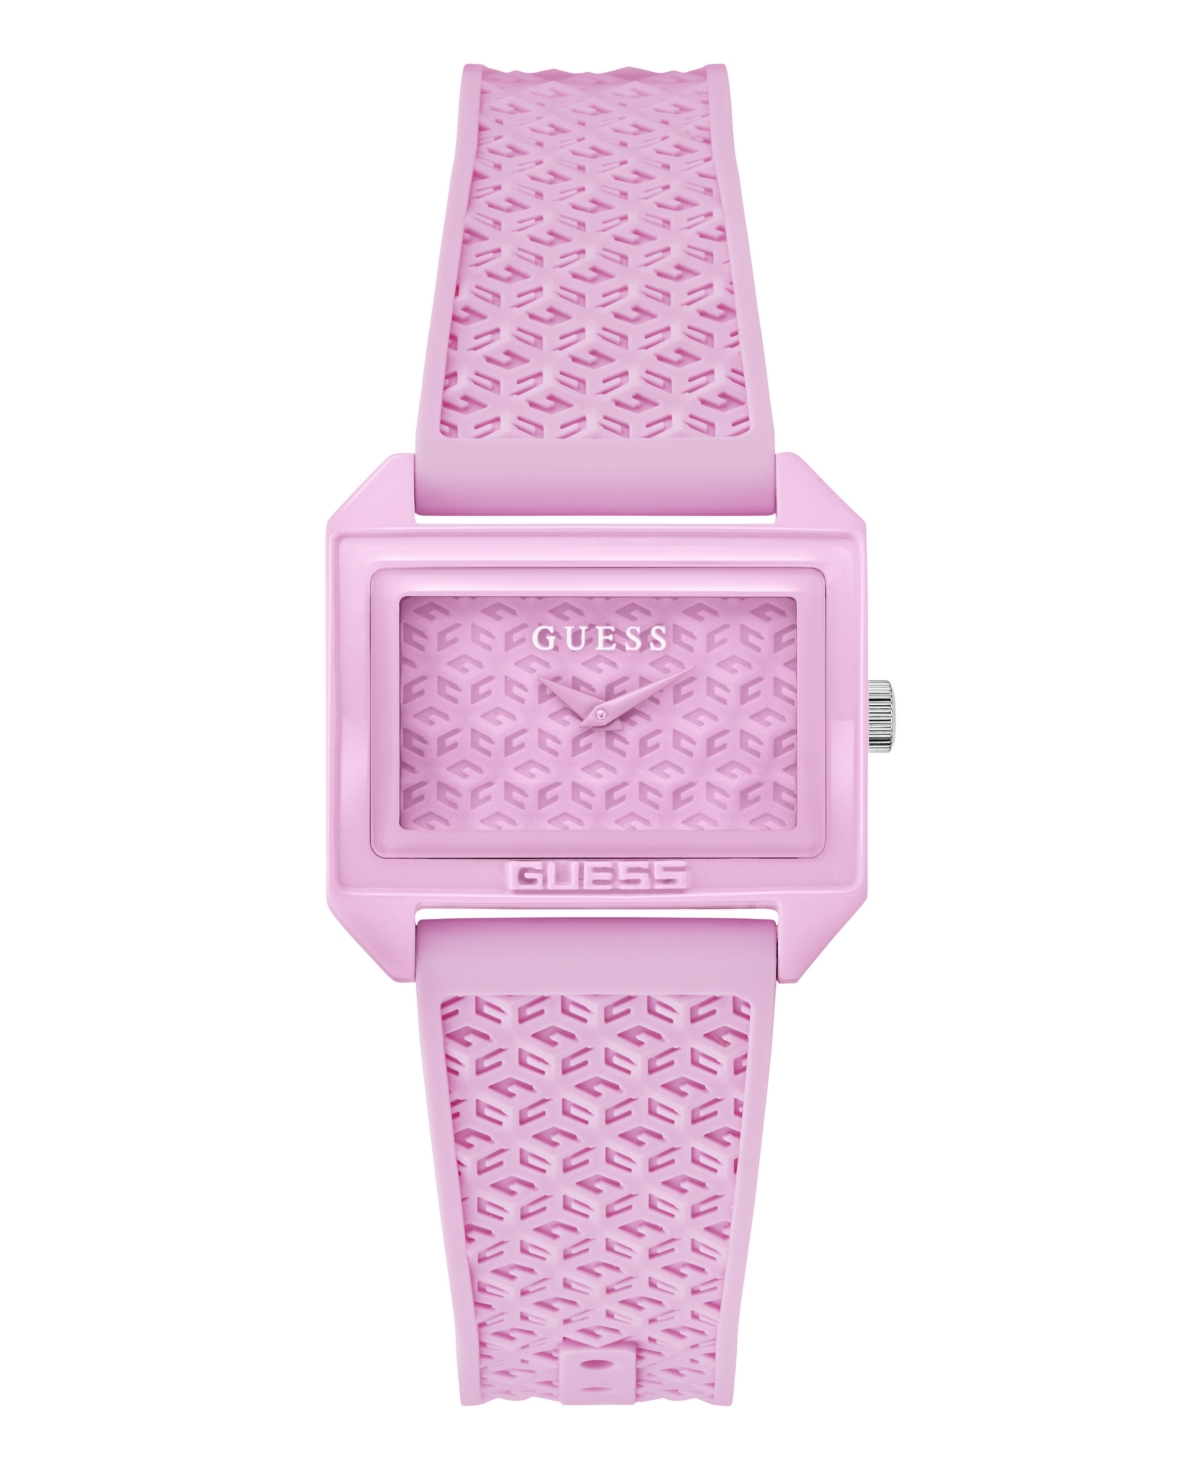 Guess Women's Analog Pink Silicone Watch 32mm